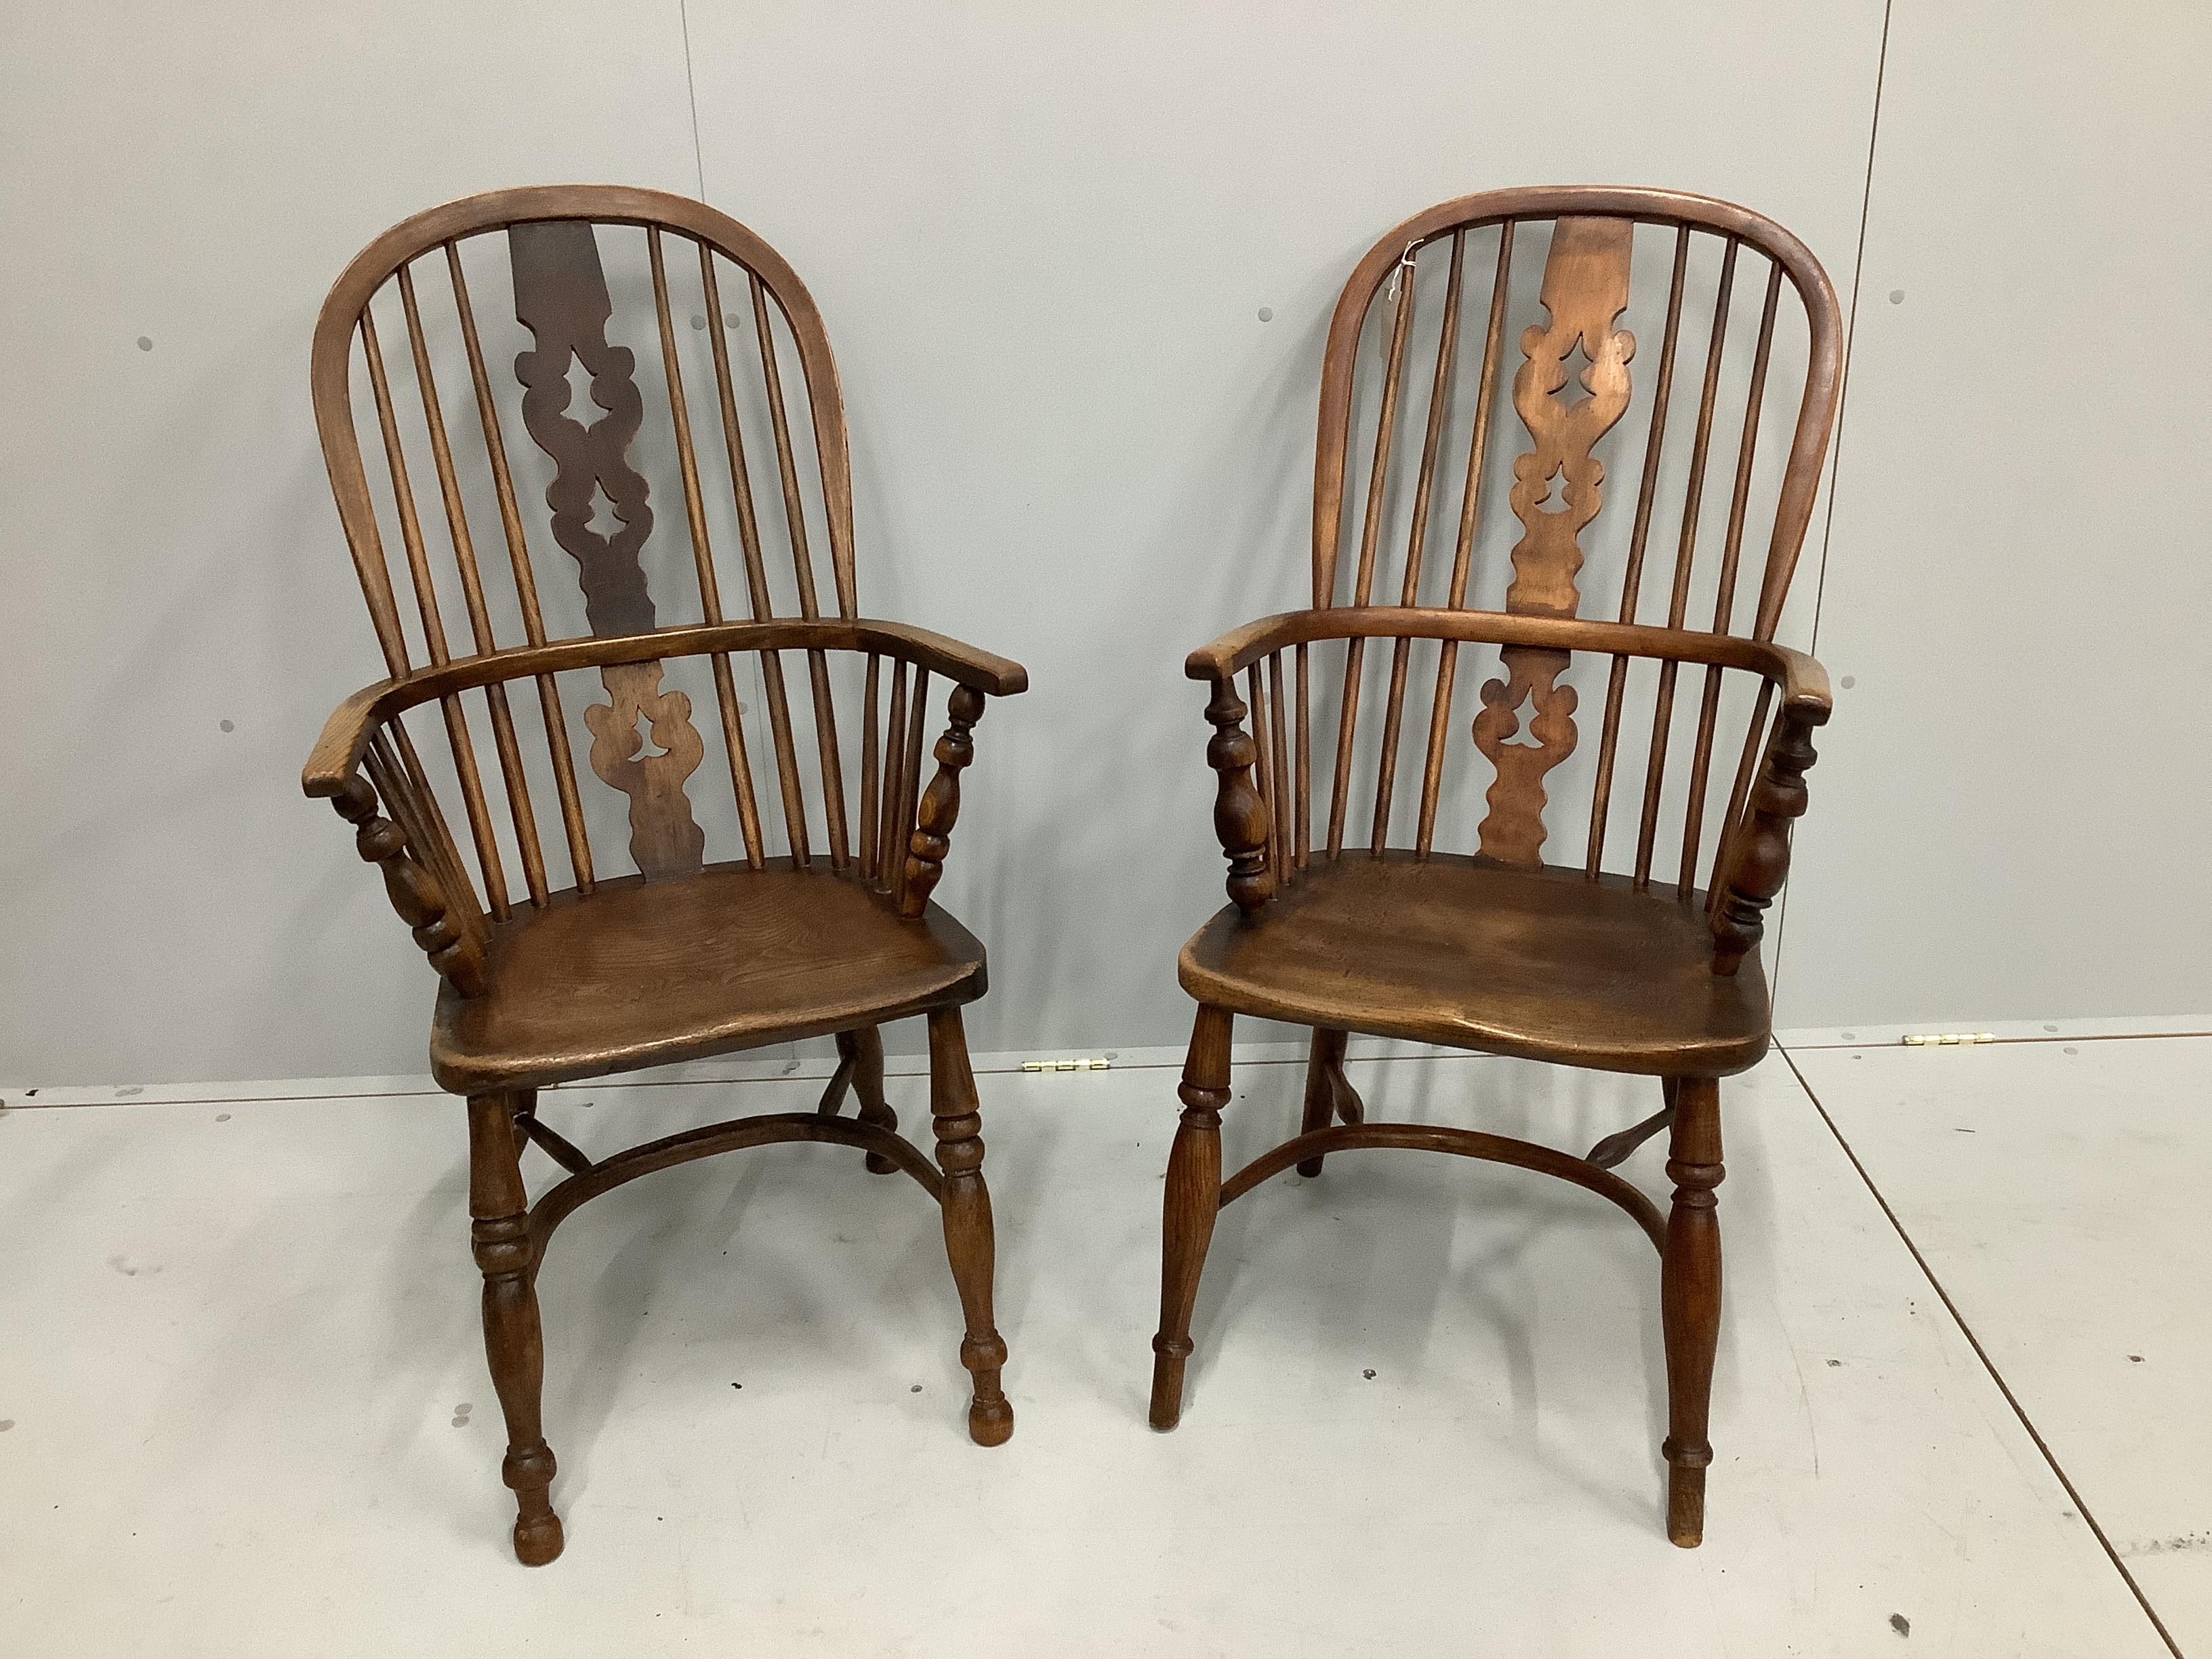 A near pair of mid 19th century Nottingham area ash and elm Windsor armchairs, larger width 53cm, depth 40cm, height 112cm                                                                                                  